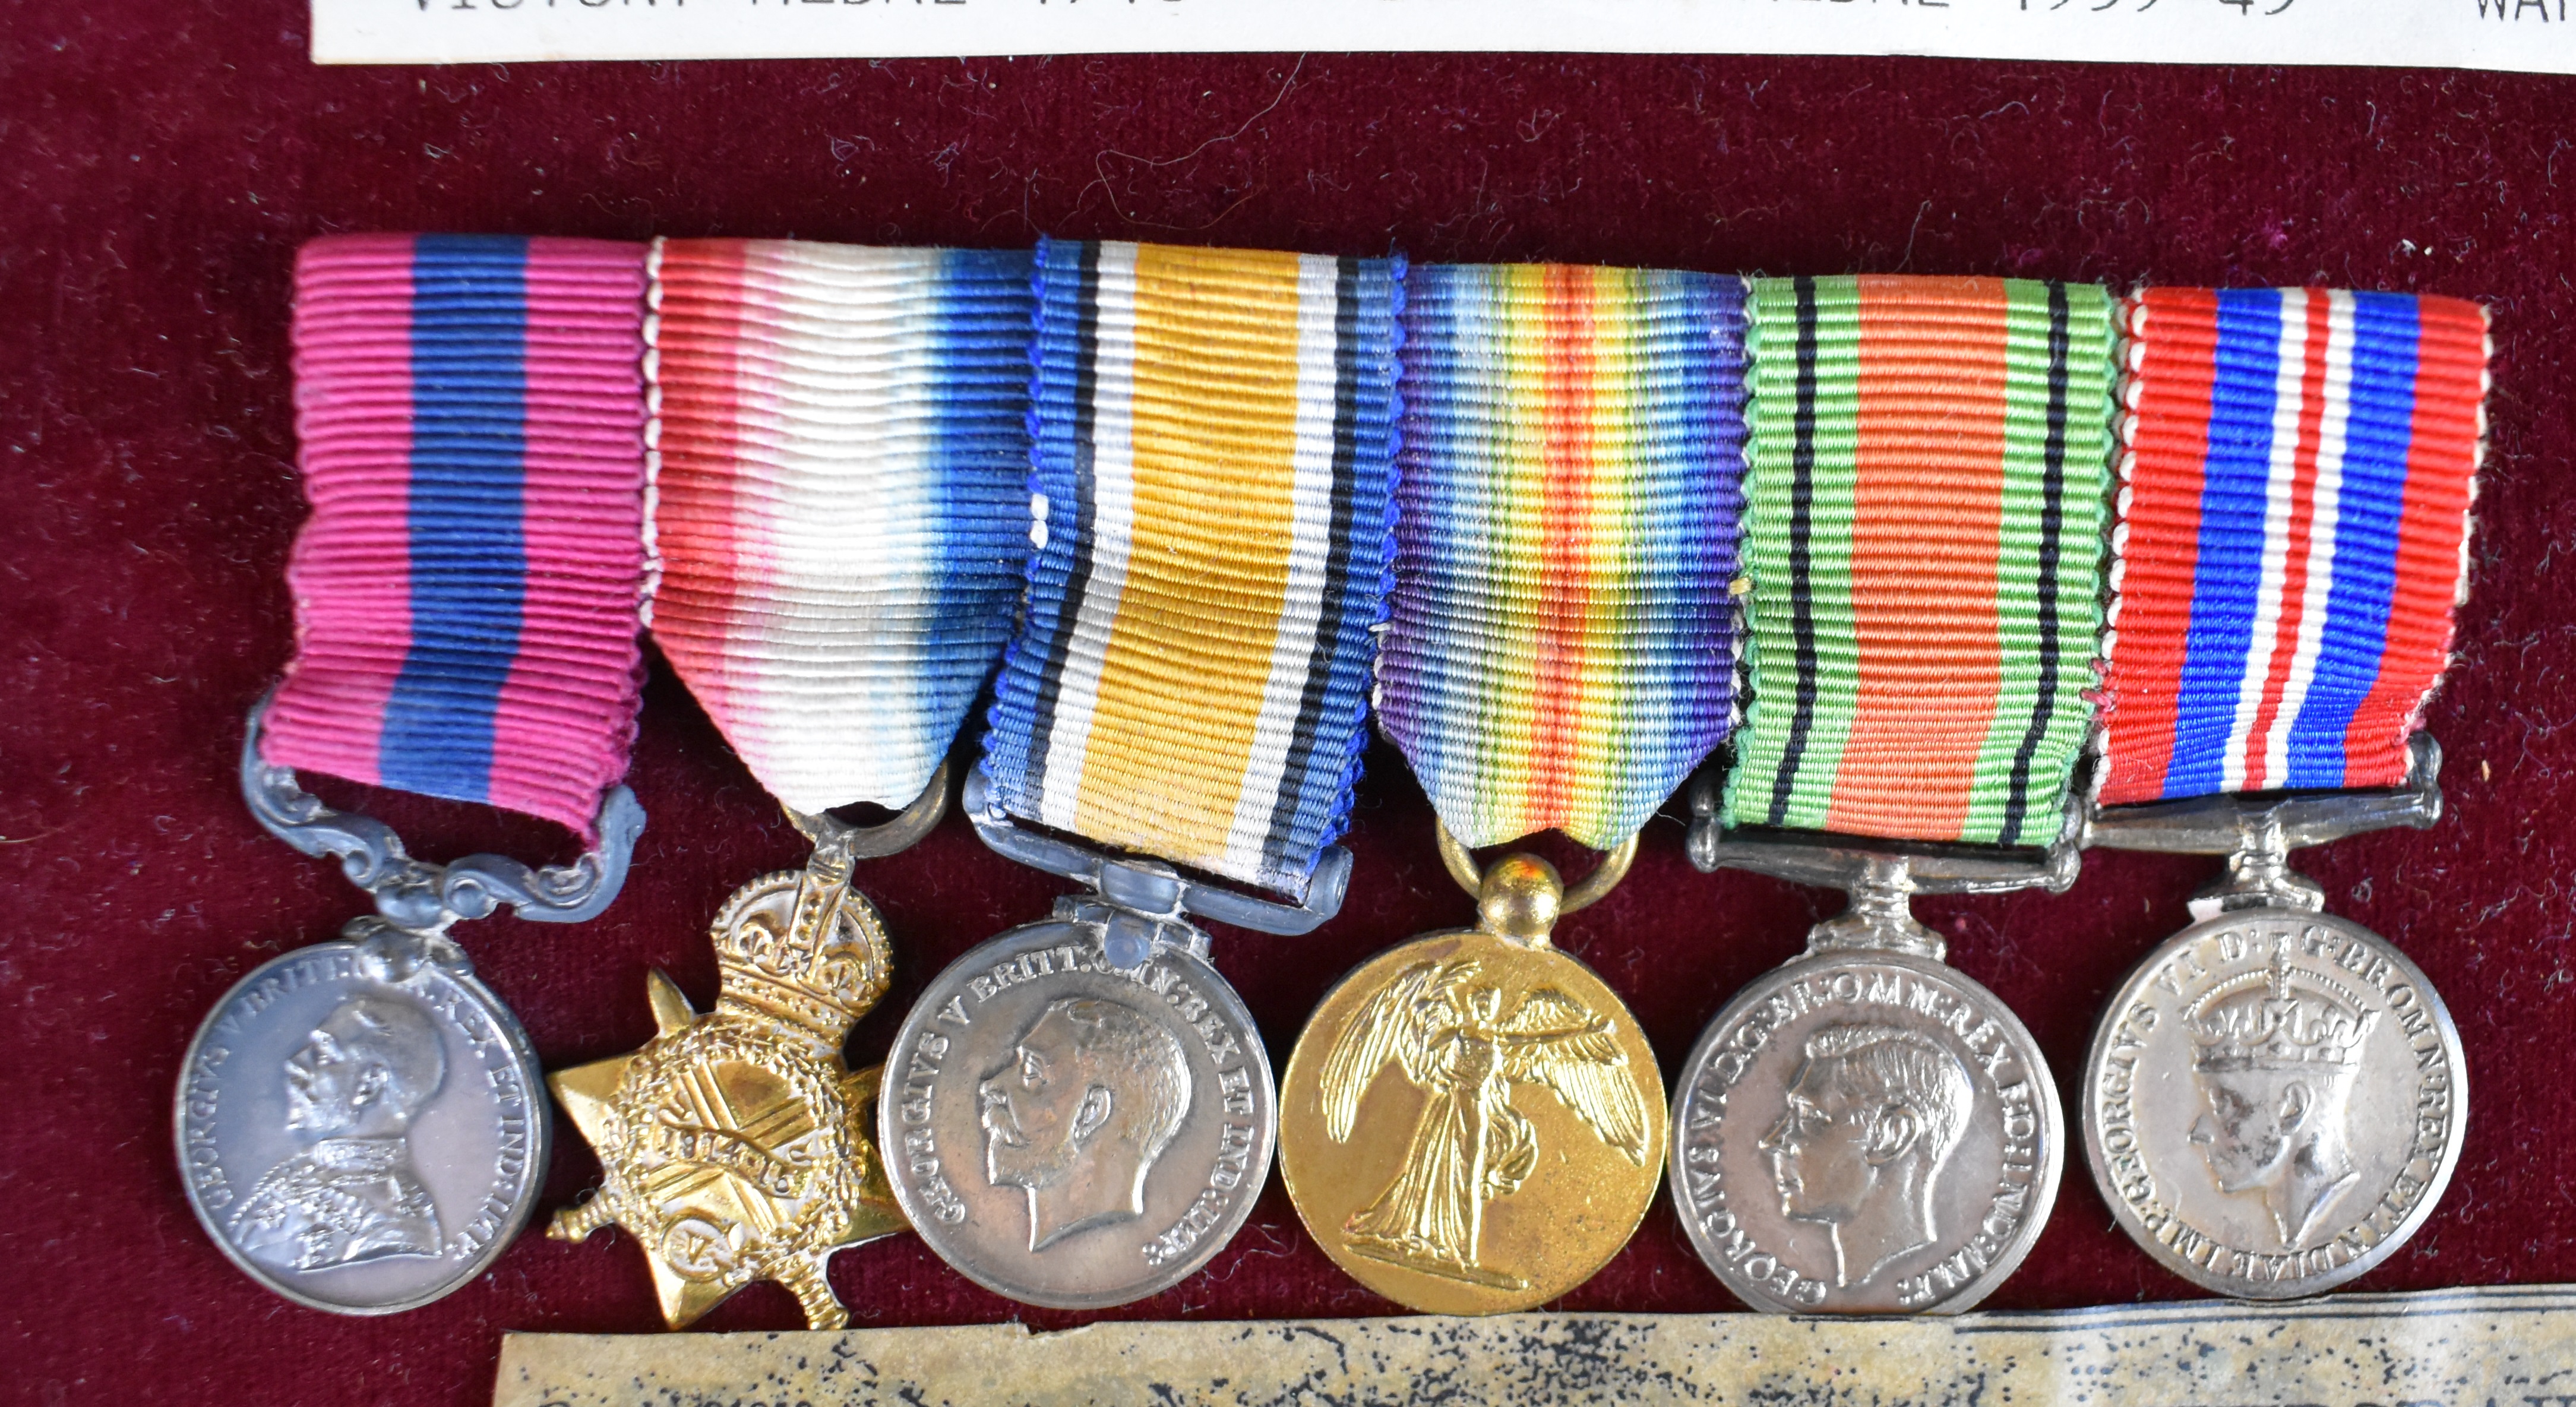 Father and son medals and associated ephemera for John Horace Philips (WW1 DCM group of six) and - Image 11 of 24